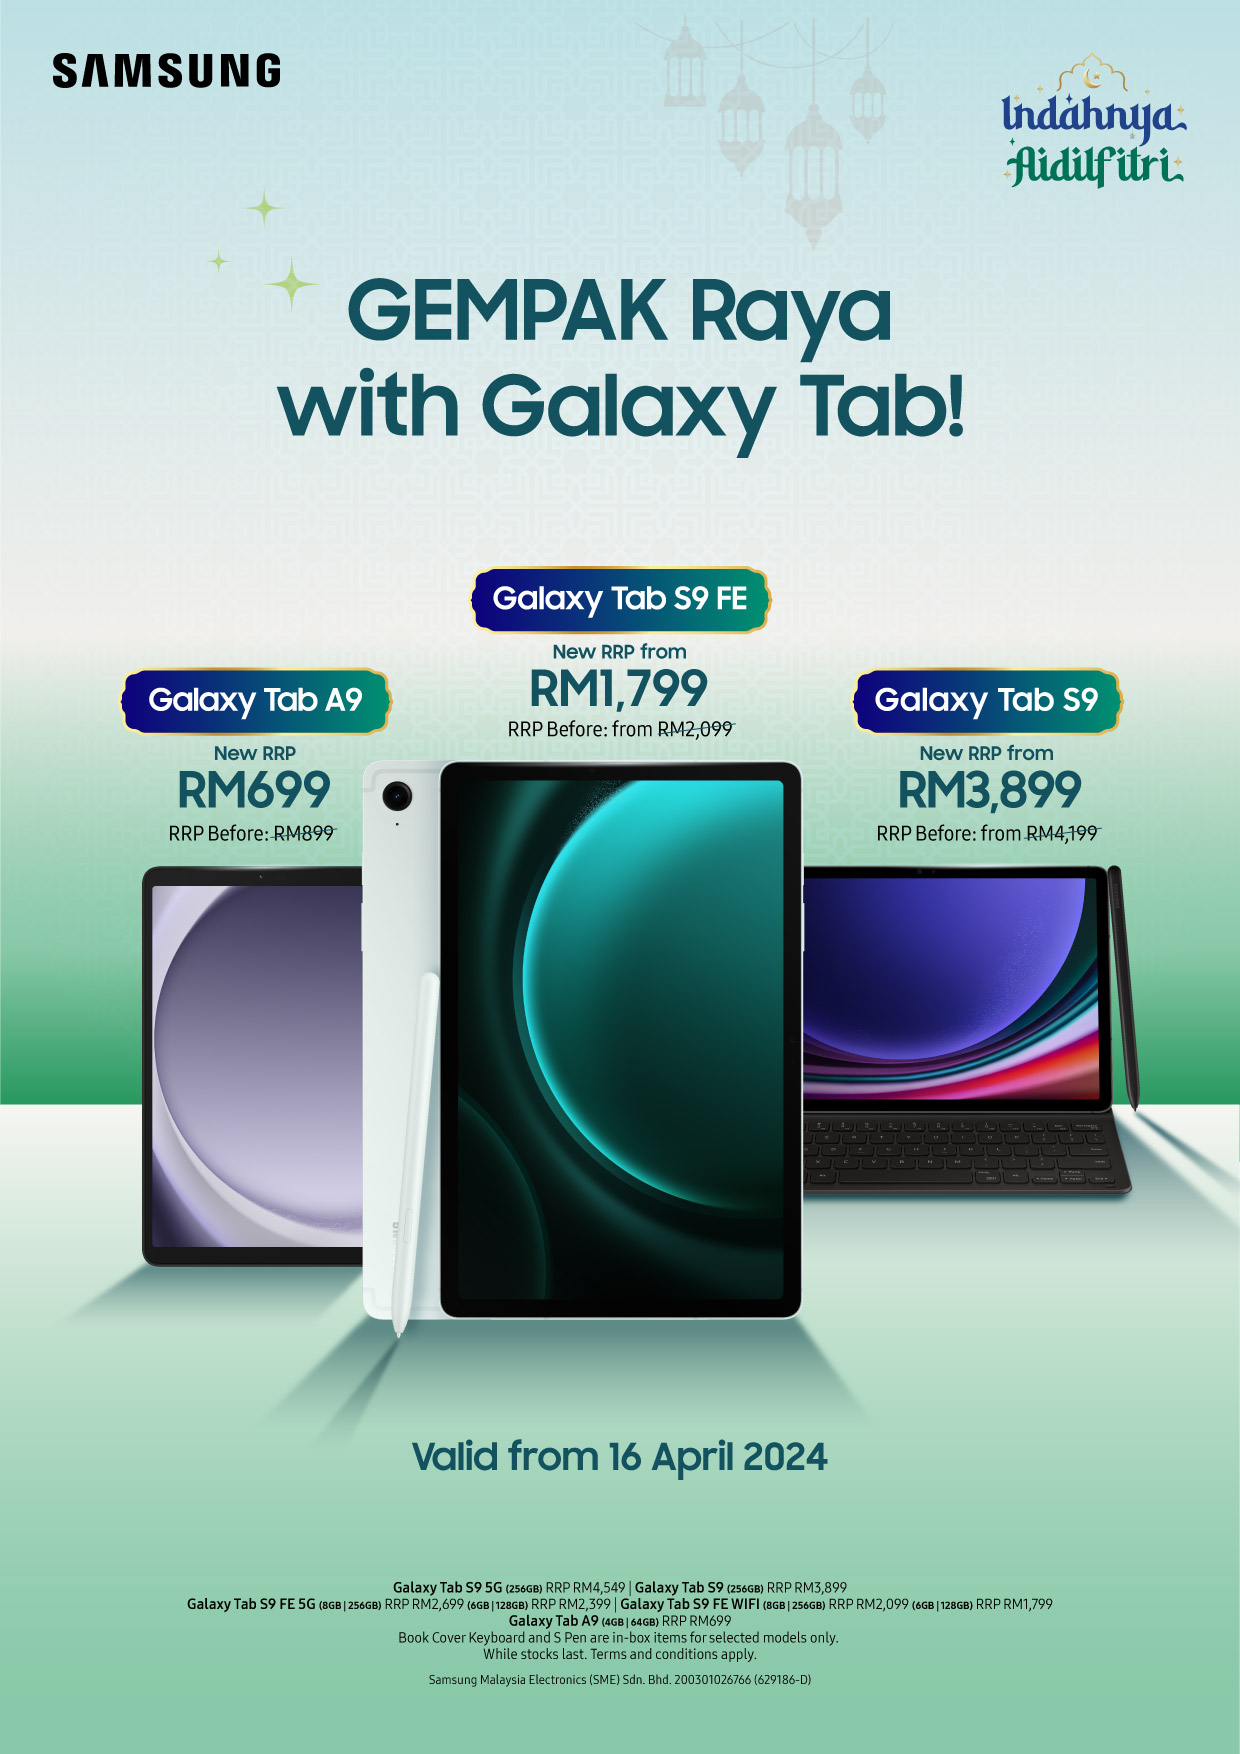 samsung reprices their tablets again, galaxy tab a9 lte now cheaper by rm200